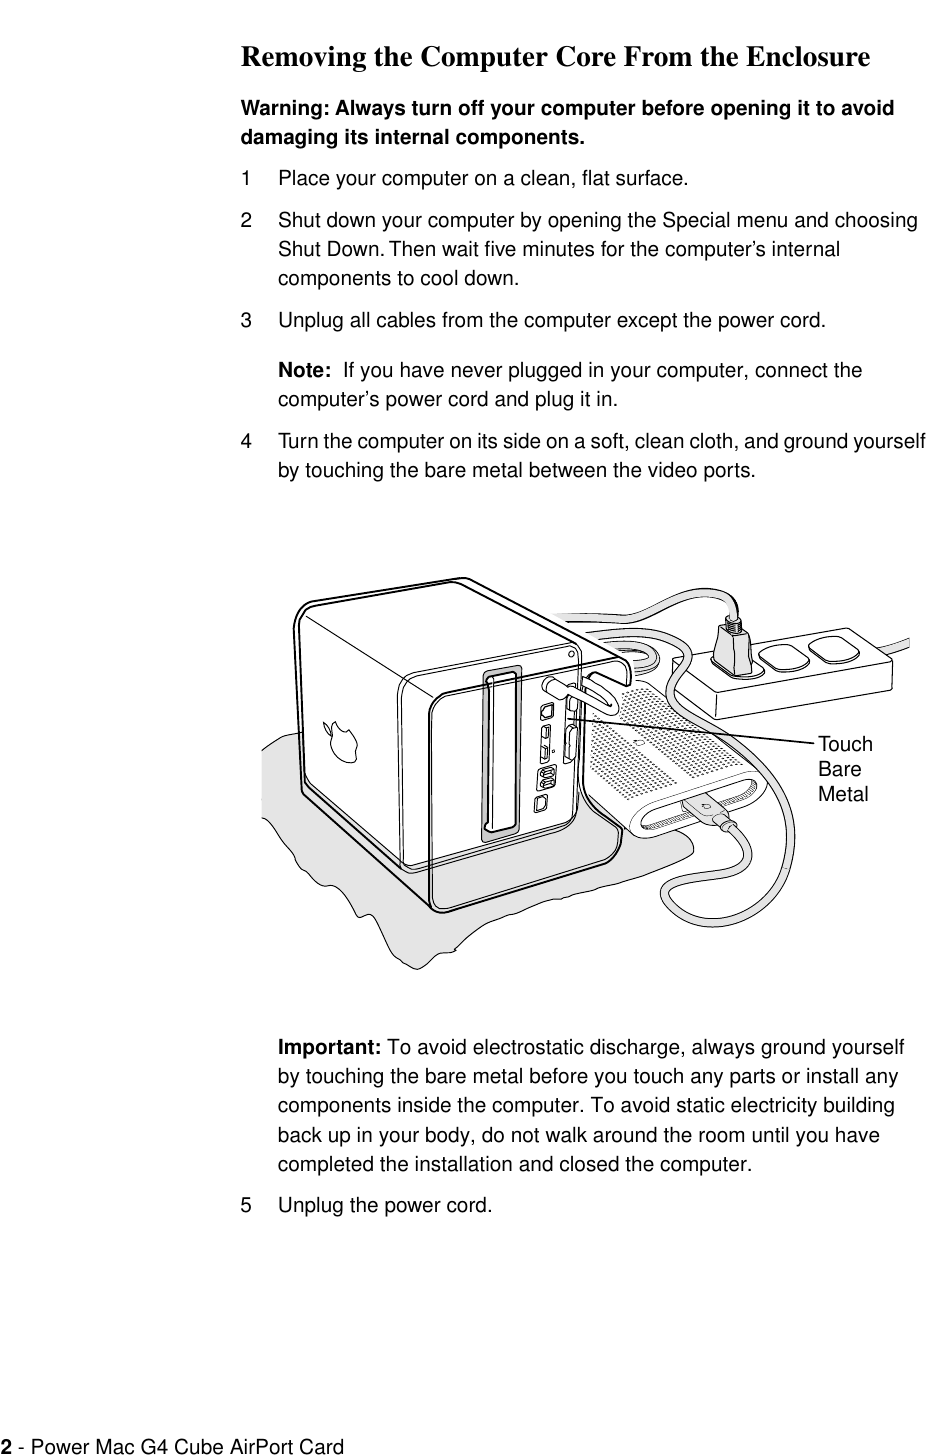  2  - Power Mac G4 Cube AirPort Card  Removing the Computer Core From the Enclosure Warning: Always turn off your computer before opening it to avoid damaging its internal components. 1 Place your computer on a clean, ﬂat surface.2 Shut down your computer by opening the Special menu and choosing Shut Down. Then wait ﬁve minutes for the computer’s internal components to cool down.3 Unplug all cables from the computer except the power cord. Note:   If you have never plugged in your computer, connect the computer’s power cord and plug it in.4 Turn the computer on its side on a soft, clean cloth, and ground yourself by touching the bare metal between the video ports. Important:  To avoid electrostatic discharge, always ground yourself by touching the bare metal before you touch any parts or install any components inside the computer. To avoid static electricity building back up in your body, do not walk around the room until you have completed the installation and closed the computer. 5 Unplug the power cord.Touch Bare Metal